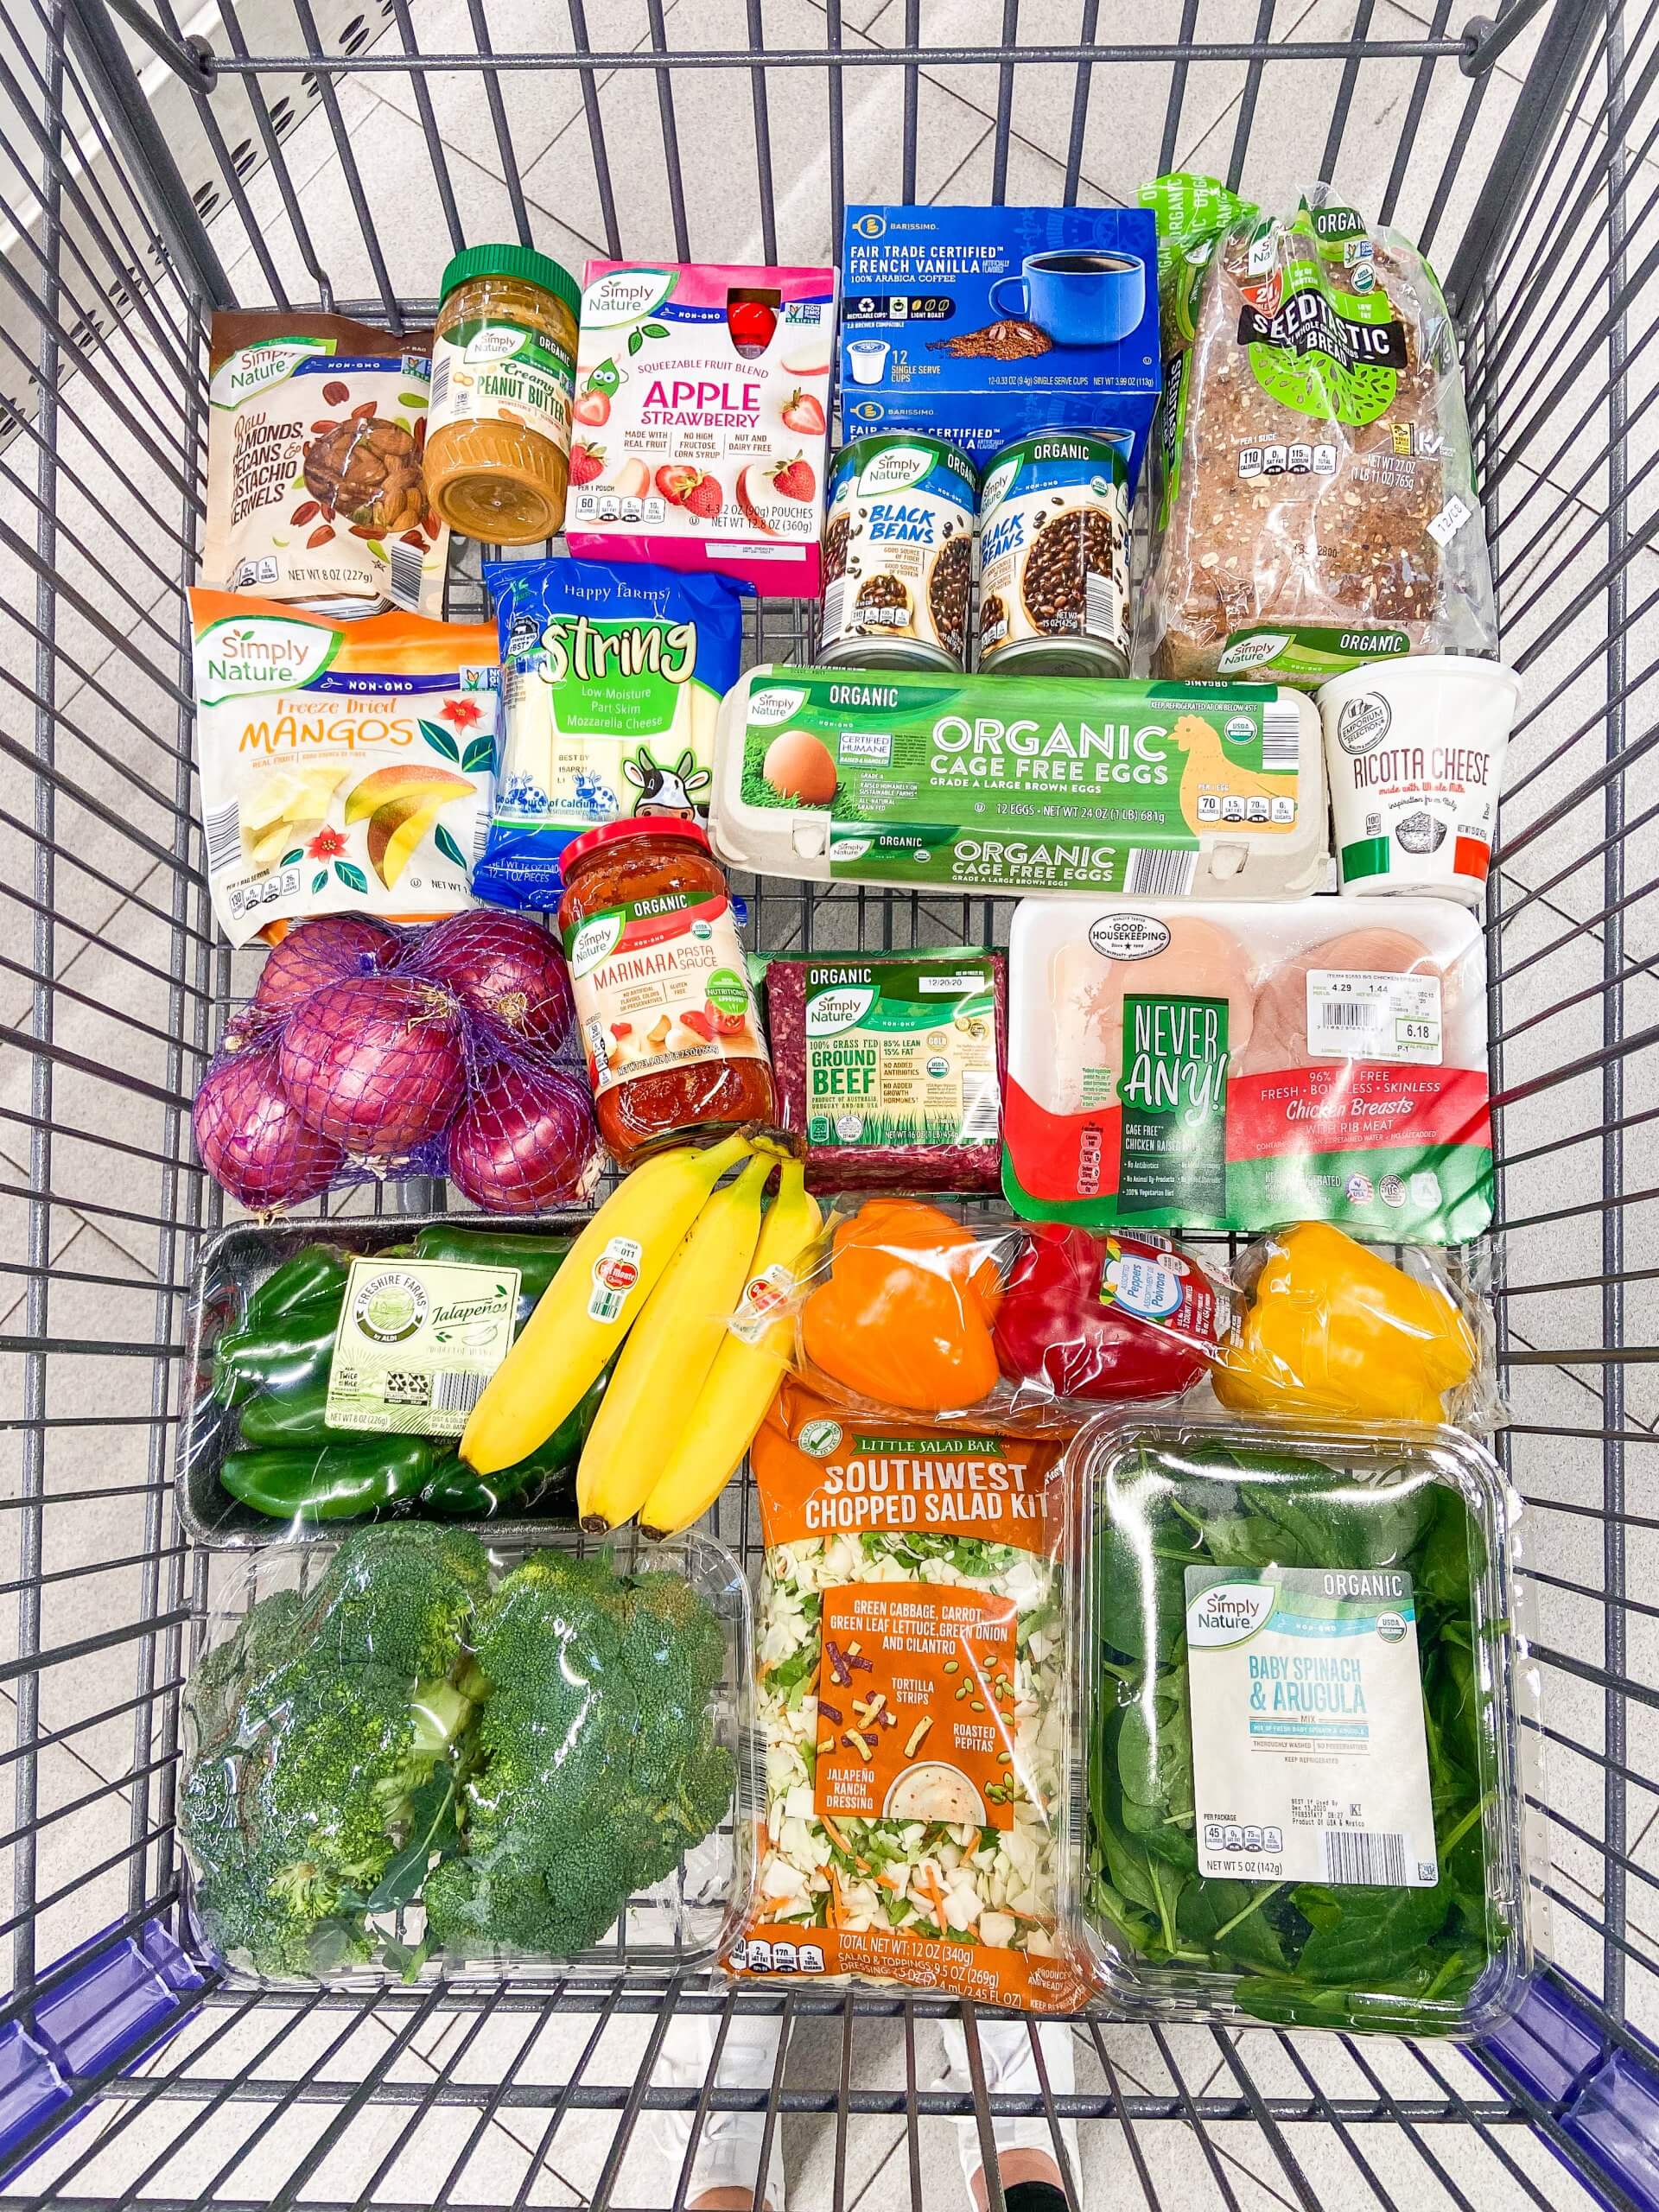 Healthy Living with ALDI USA